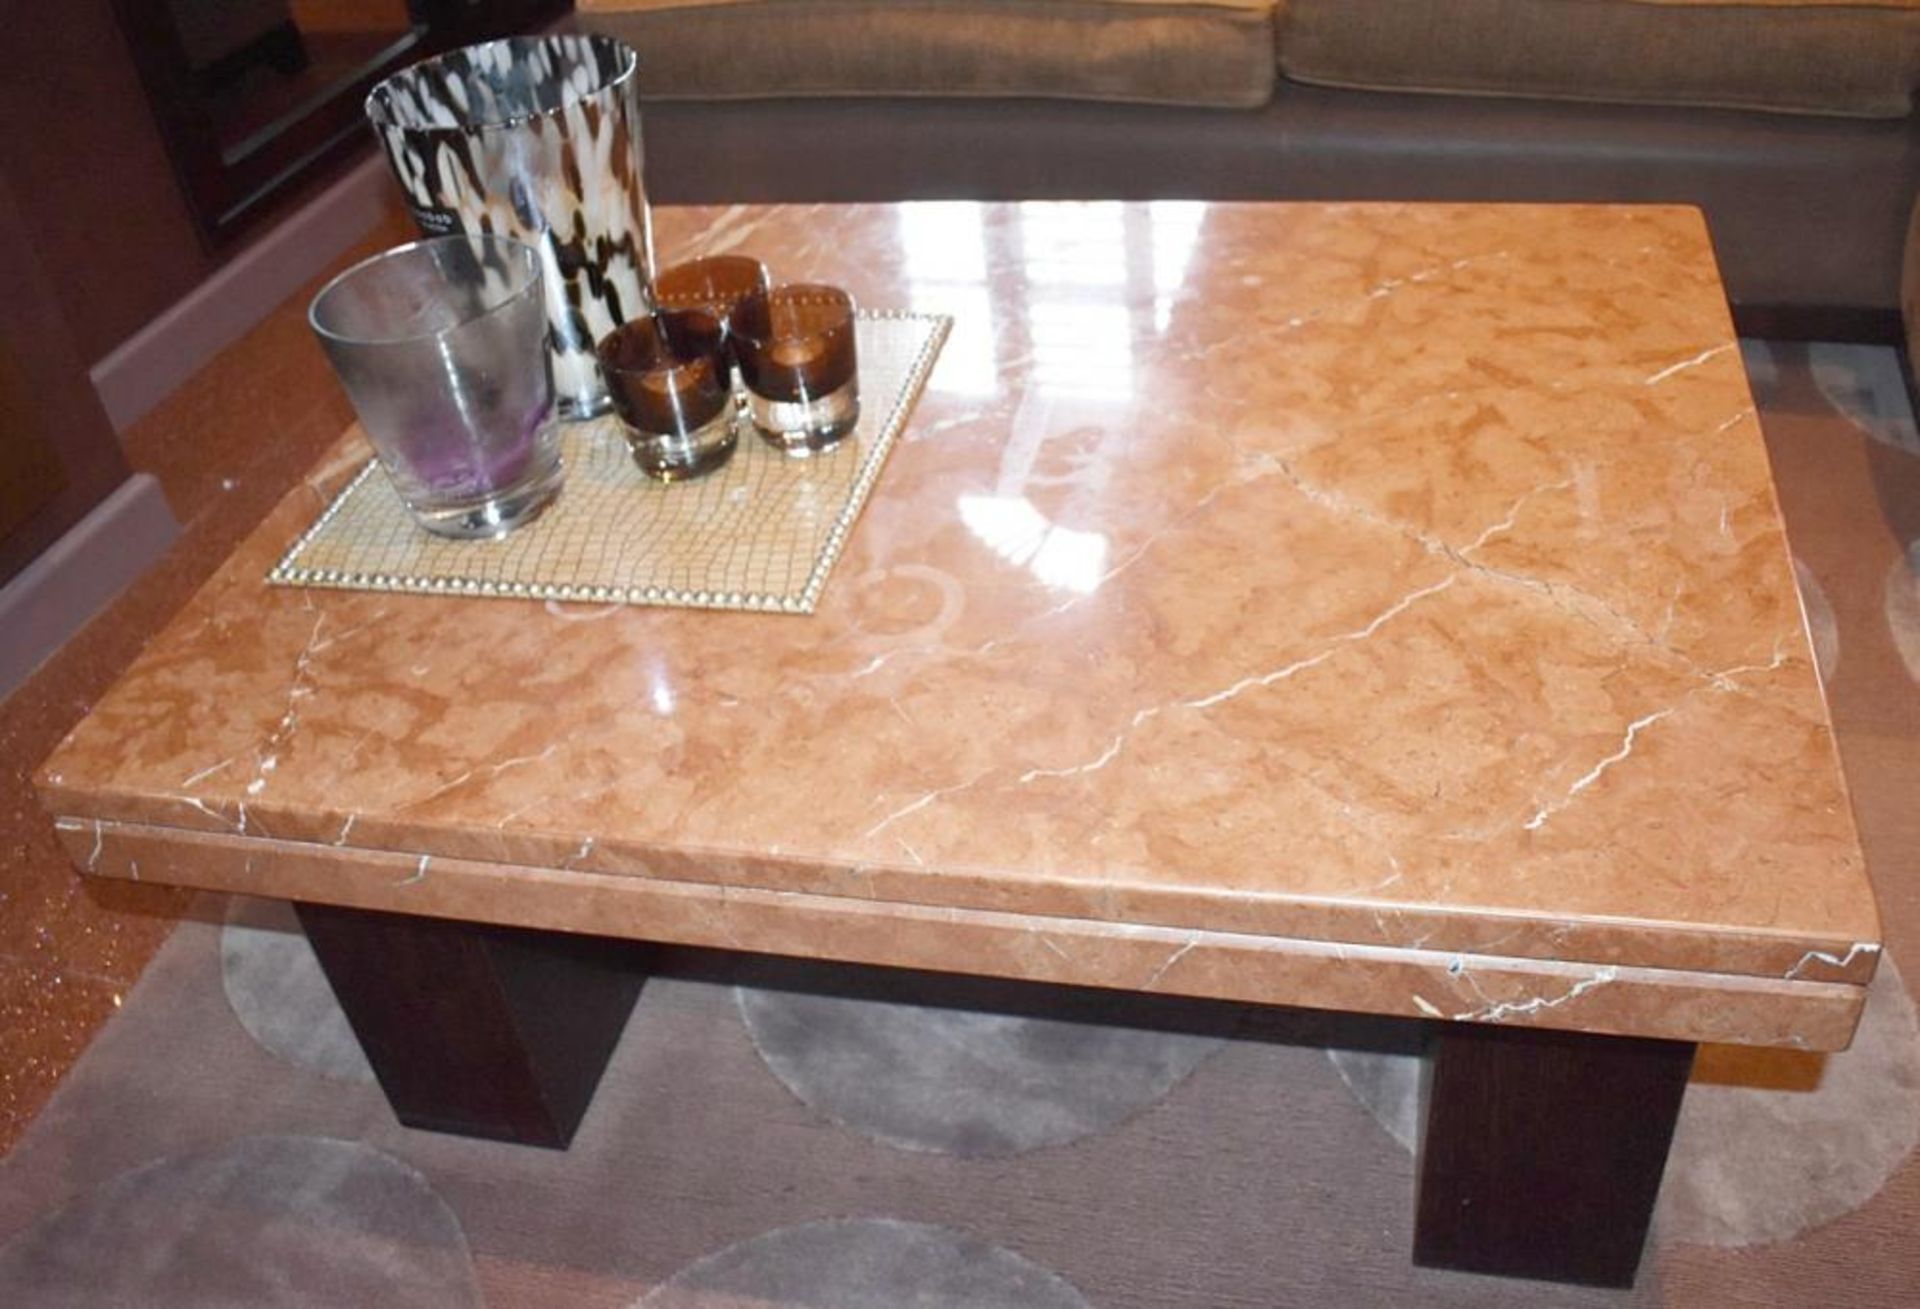 1 x Marble Topped Coffee Table - Dimensions: 100x80x44cm - Ref: ABR003 / PFR - CL491 - Used In Very - Image 4 of 6